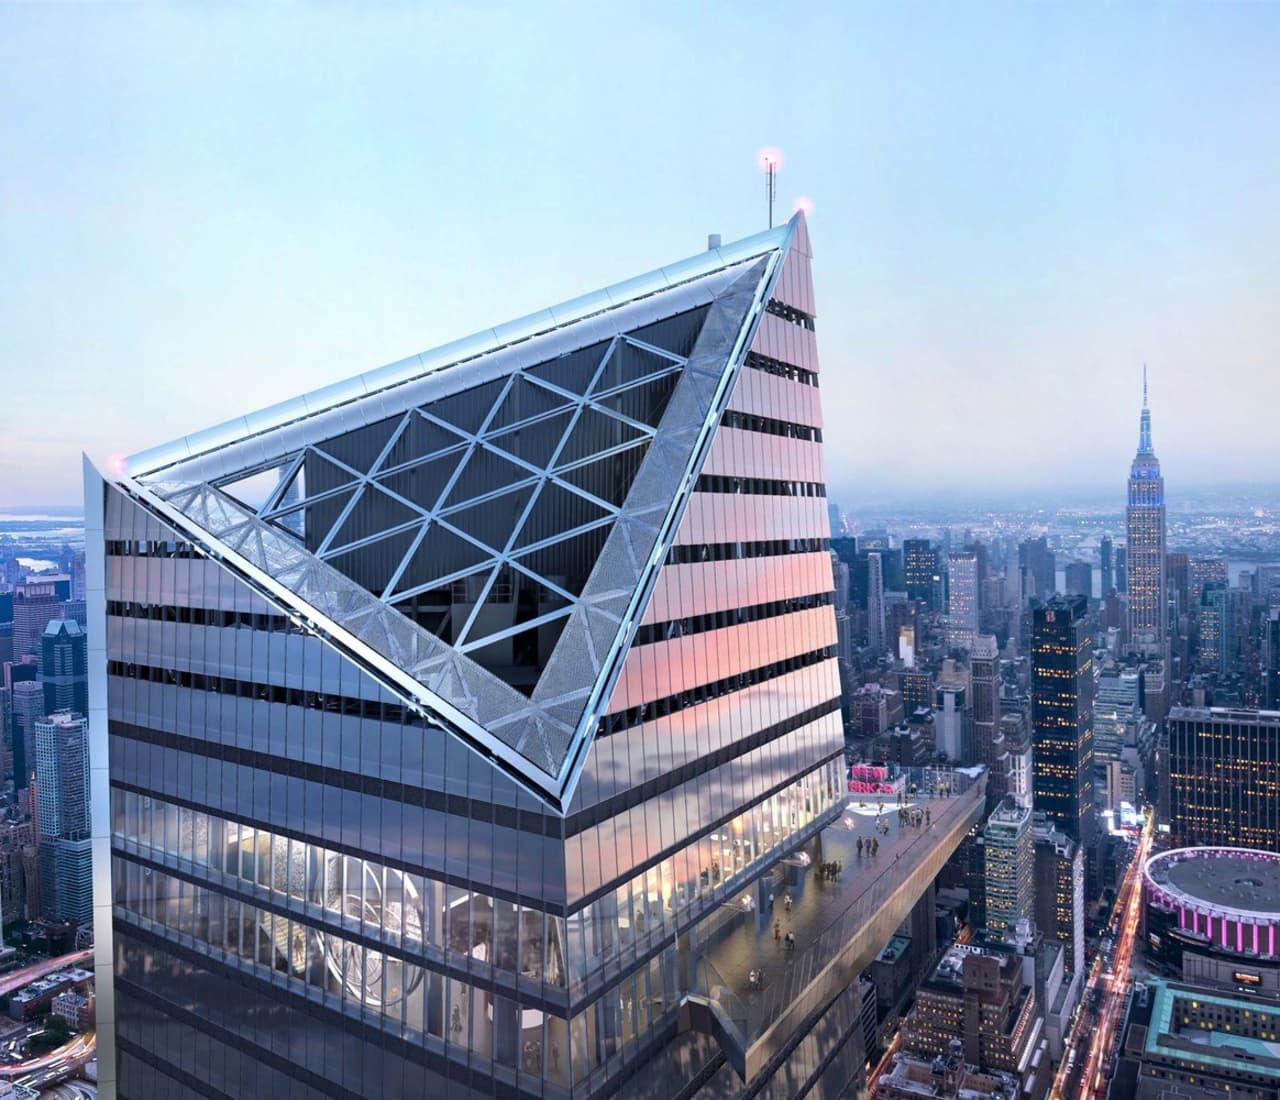 Neiman Marcus Opens A Multi Level Retail Experience At Hudson Yards In New  York City